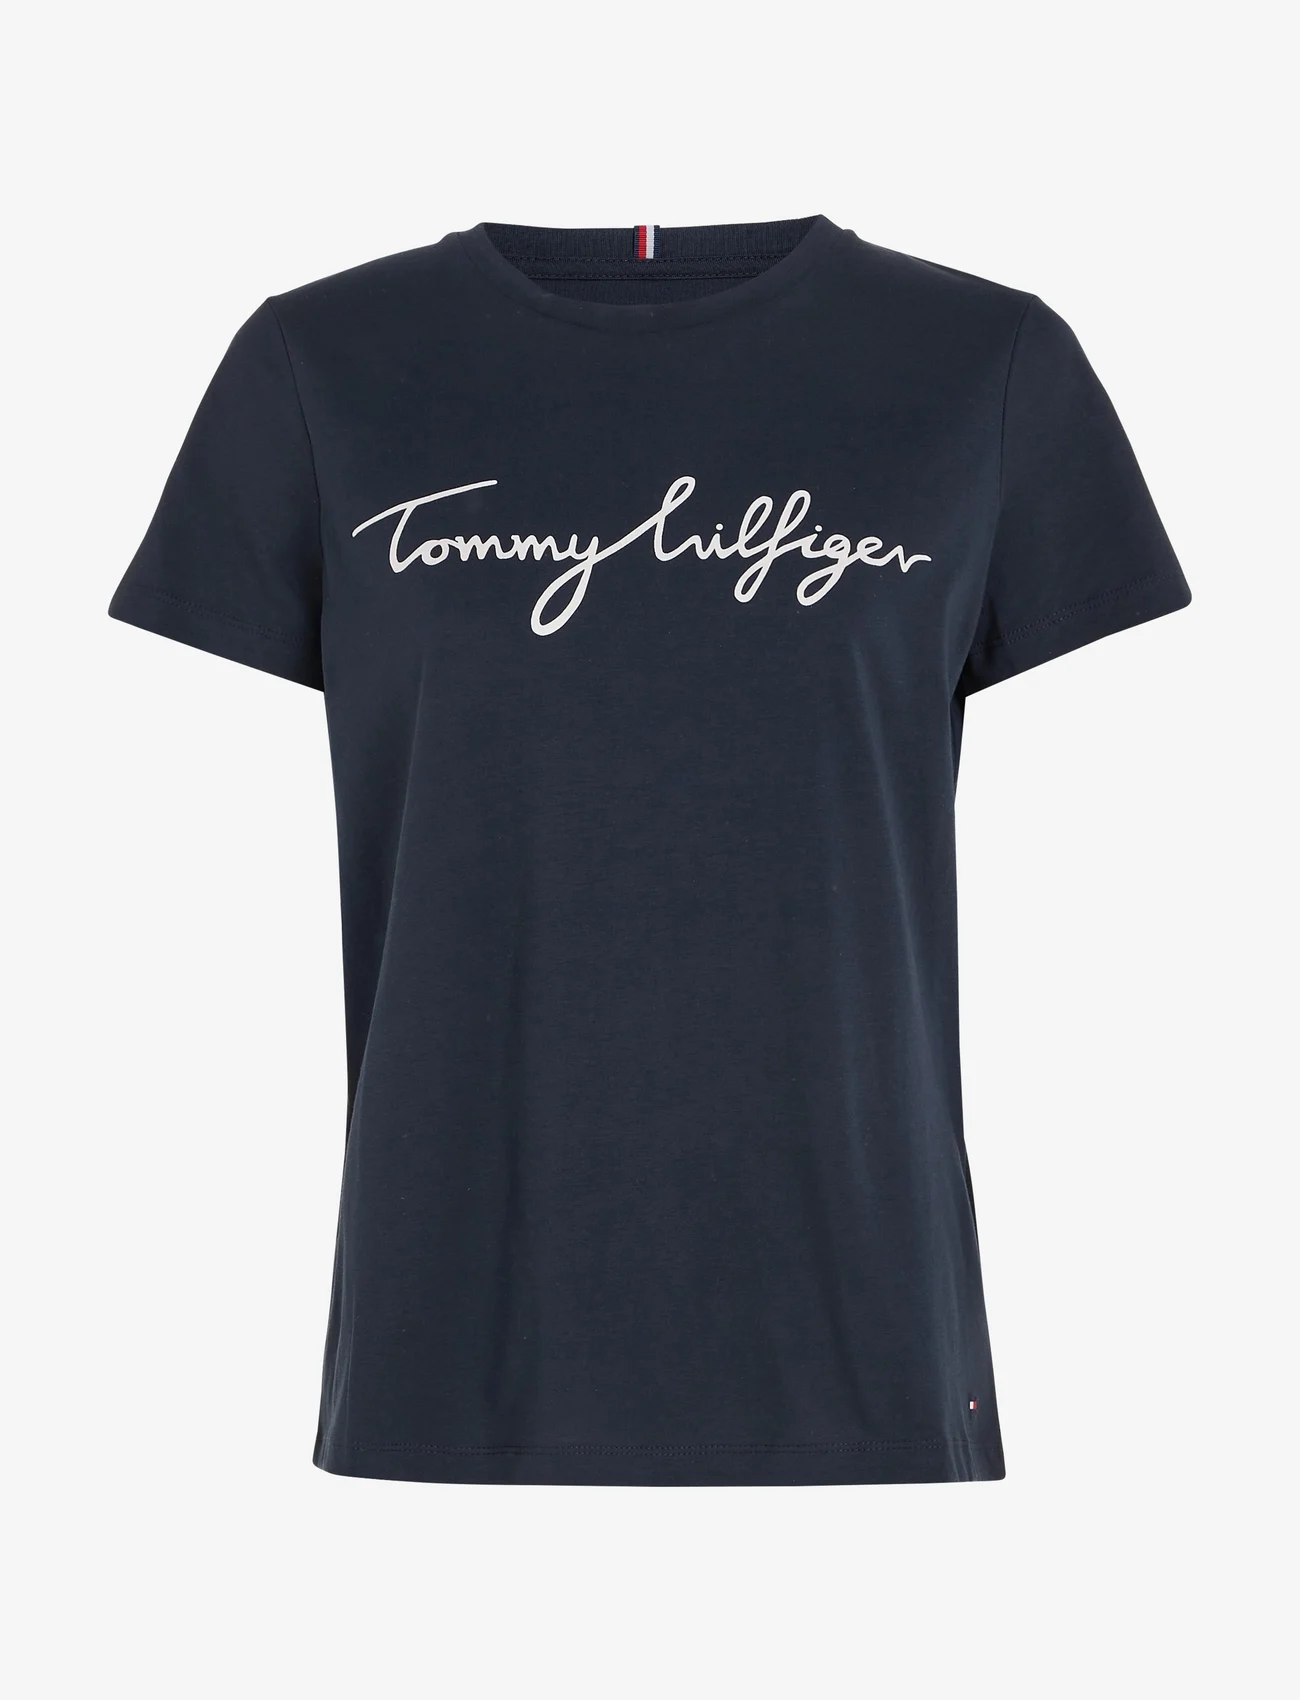 Tommy Hilfiger - HERITAGE CREW NECK GRAPHIC TEE - t-shirts & tops - midnight - 0